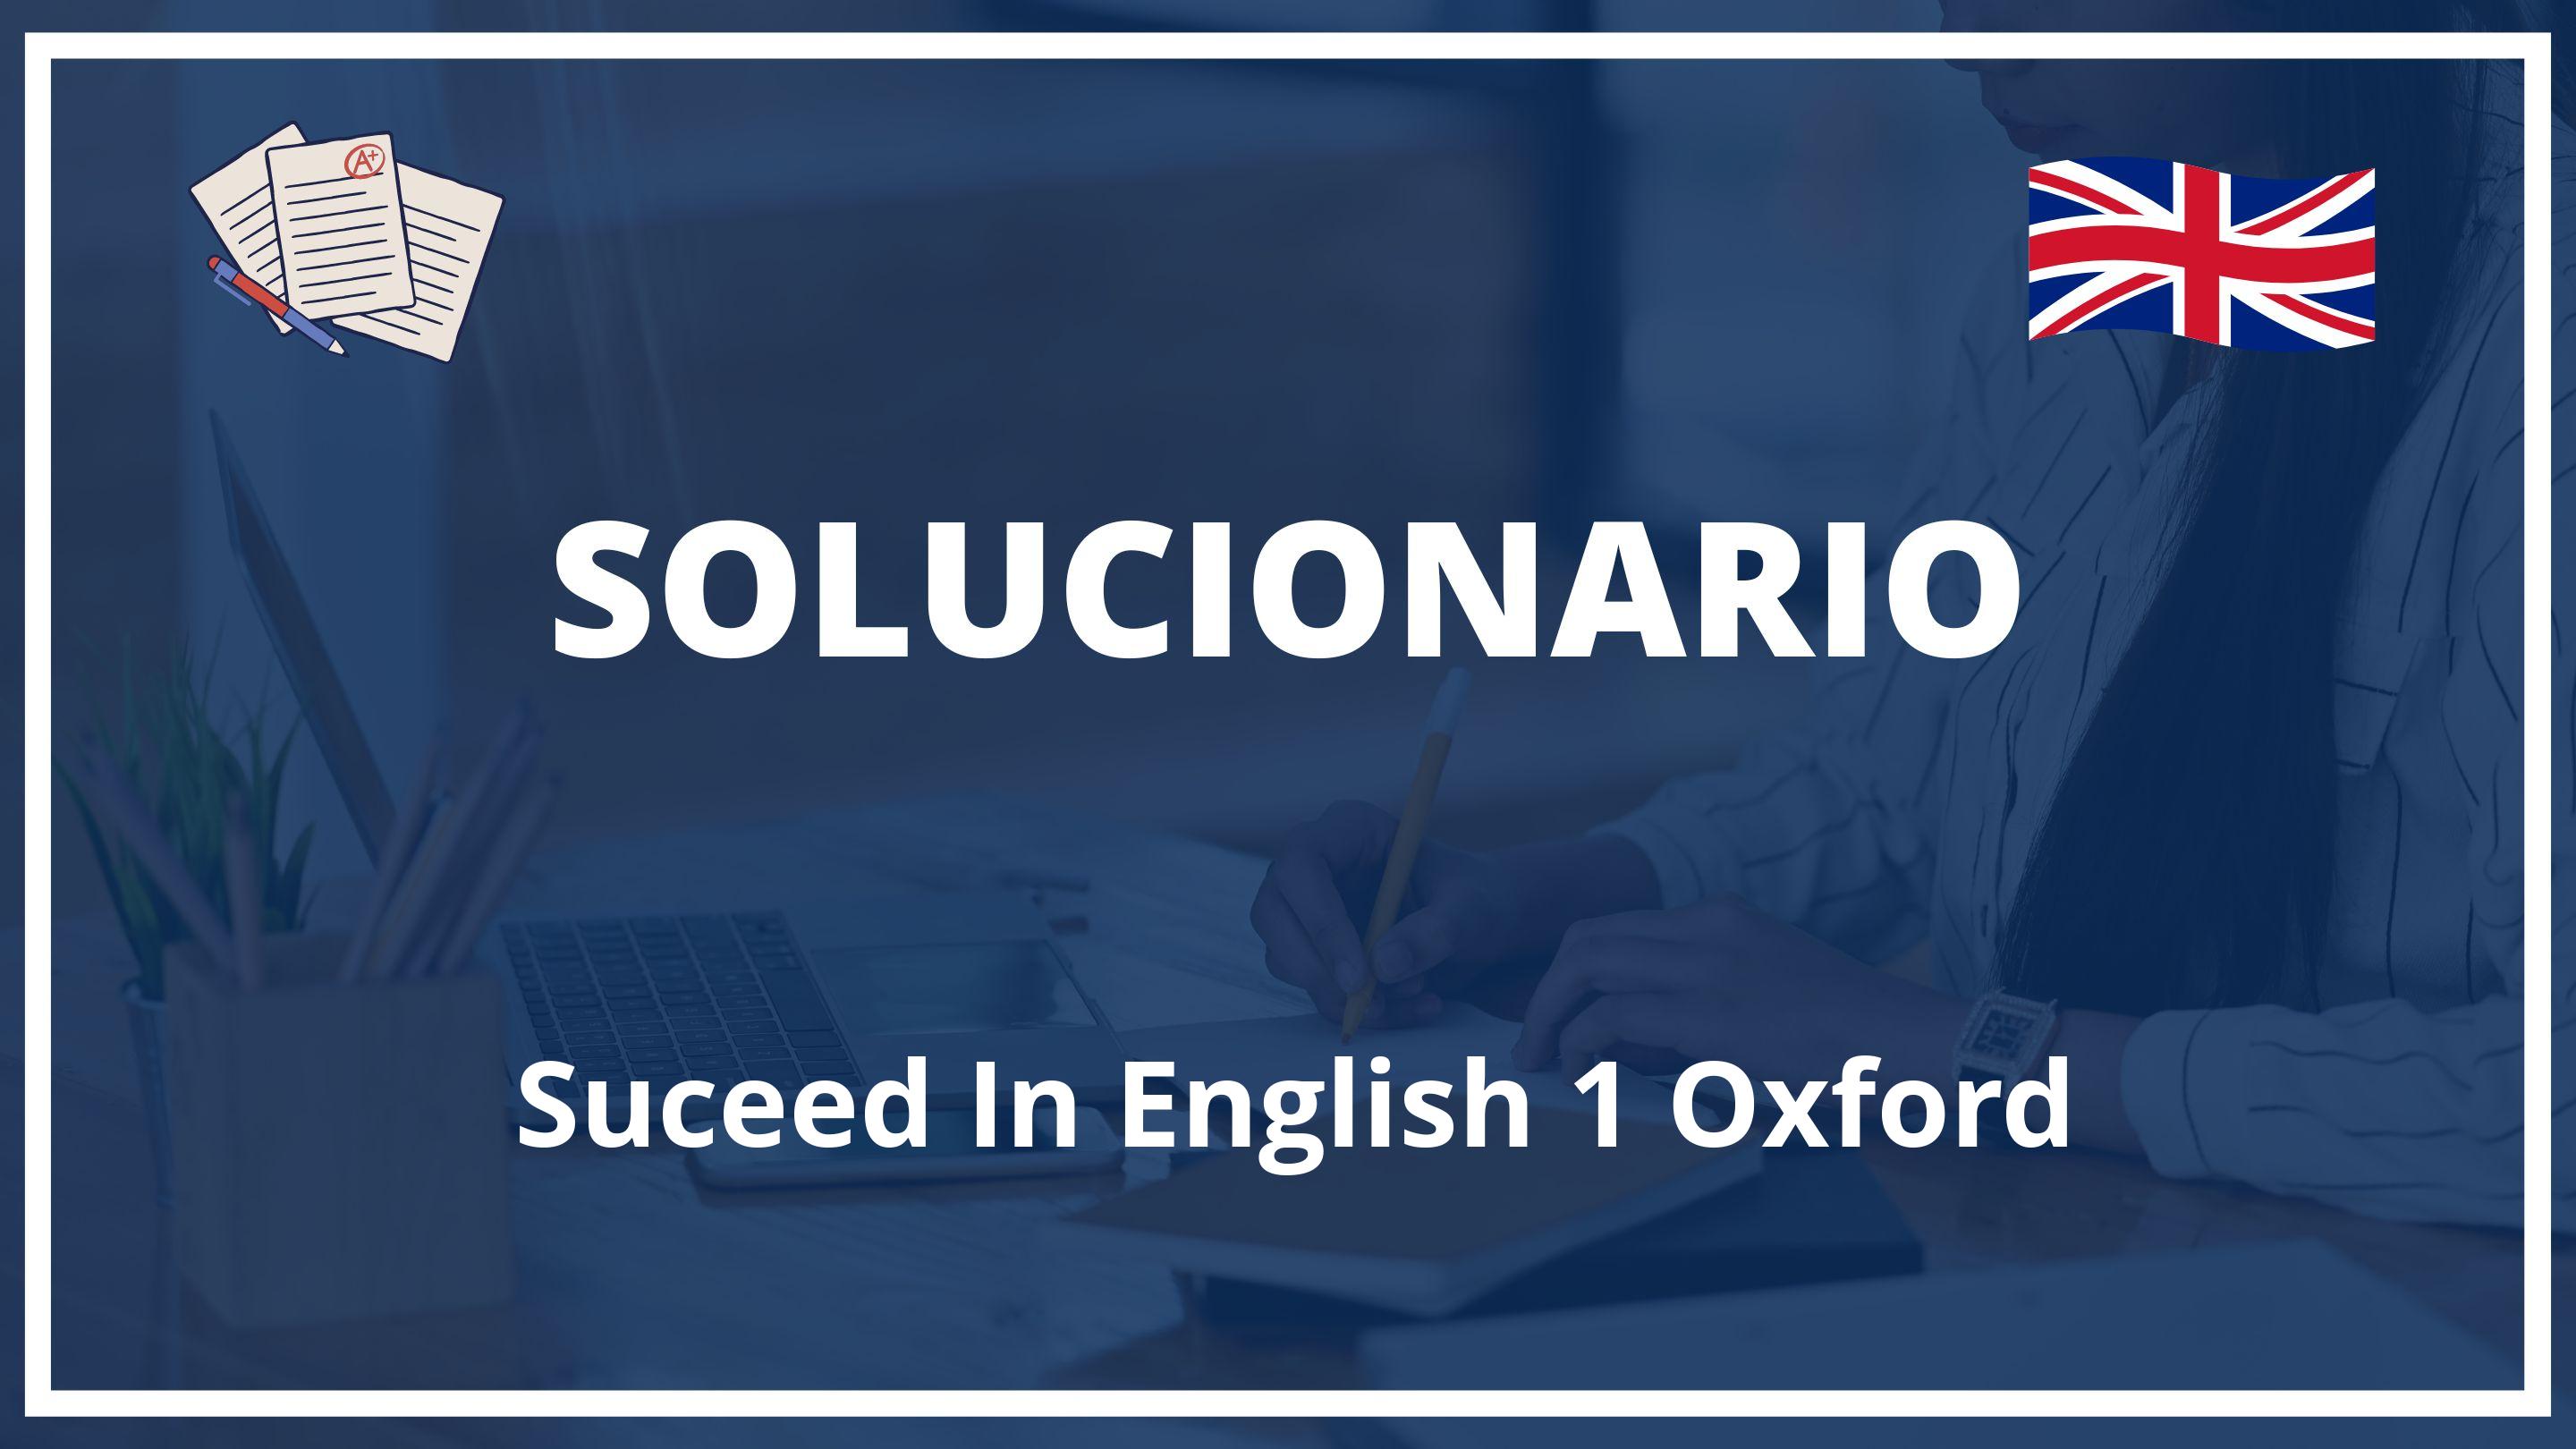 Suceed In English 1 Oxford